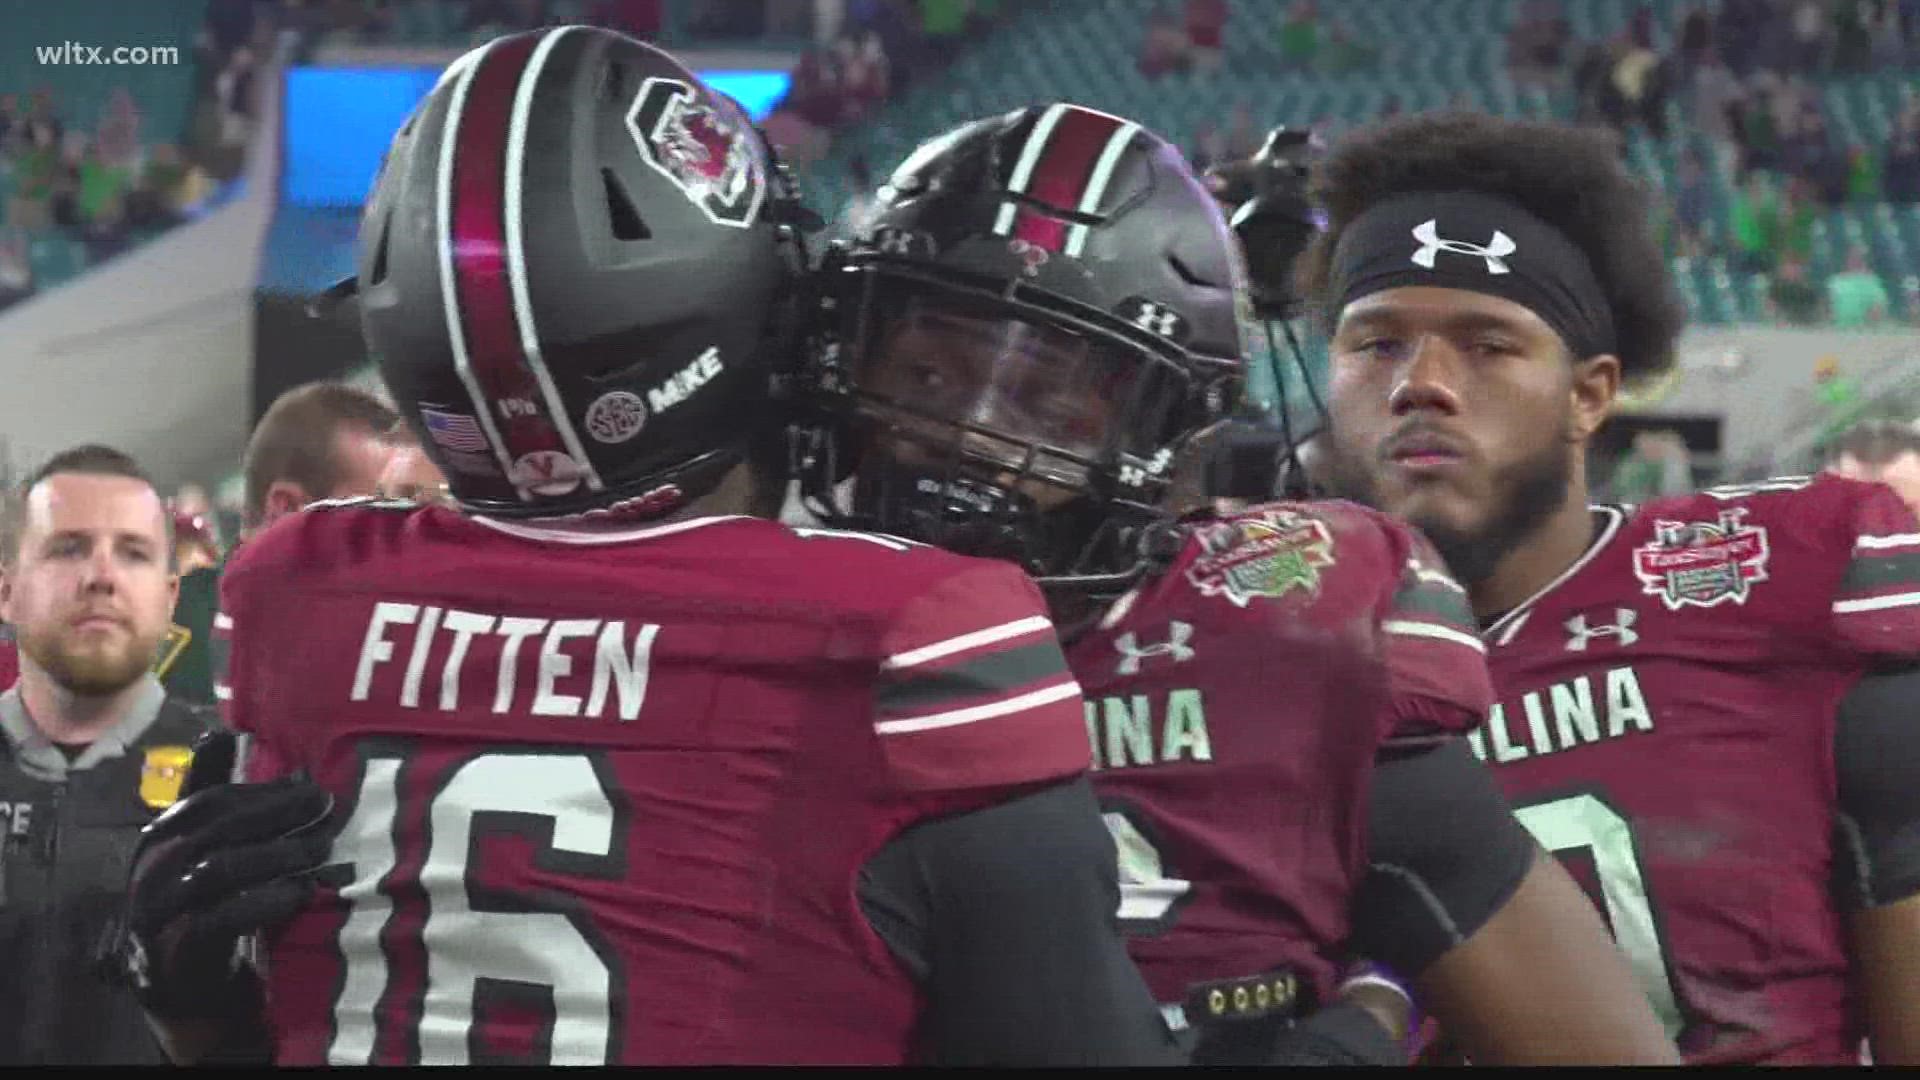 The South Carolina Gamecocks put on a show against the Notre Dame Fighting Irish in the Gator Bowl, but it wasn't quite enough.